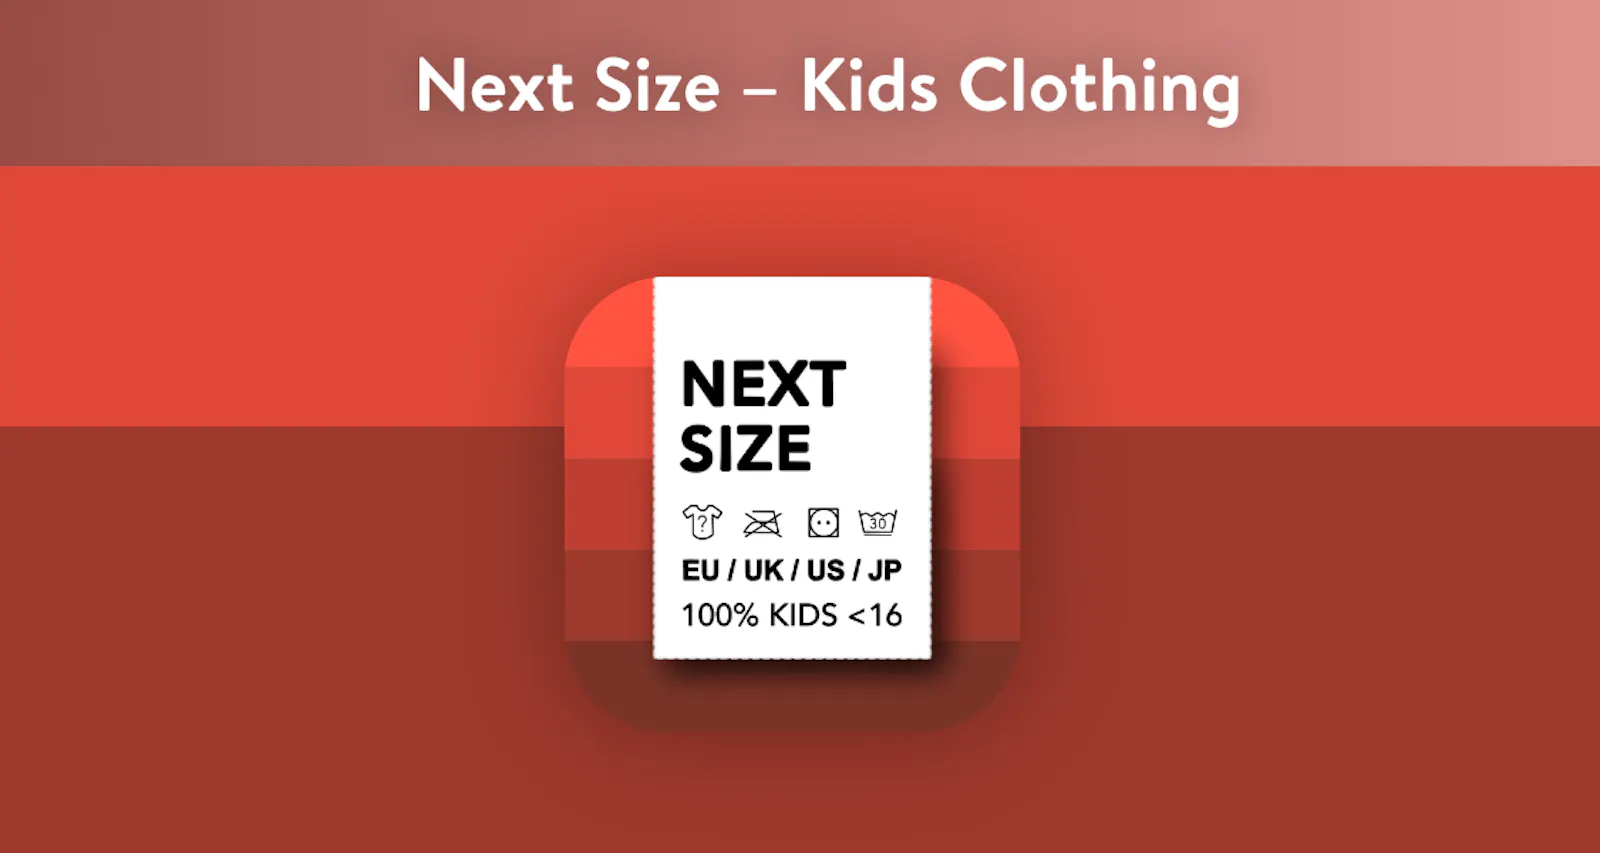 Next Size – Kids Clothing: App Icon showing a washing label on red background.